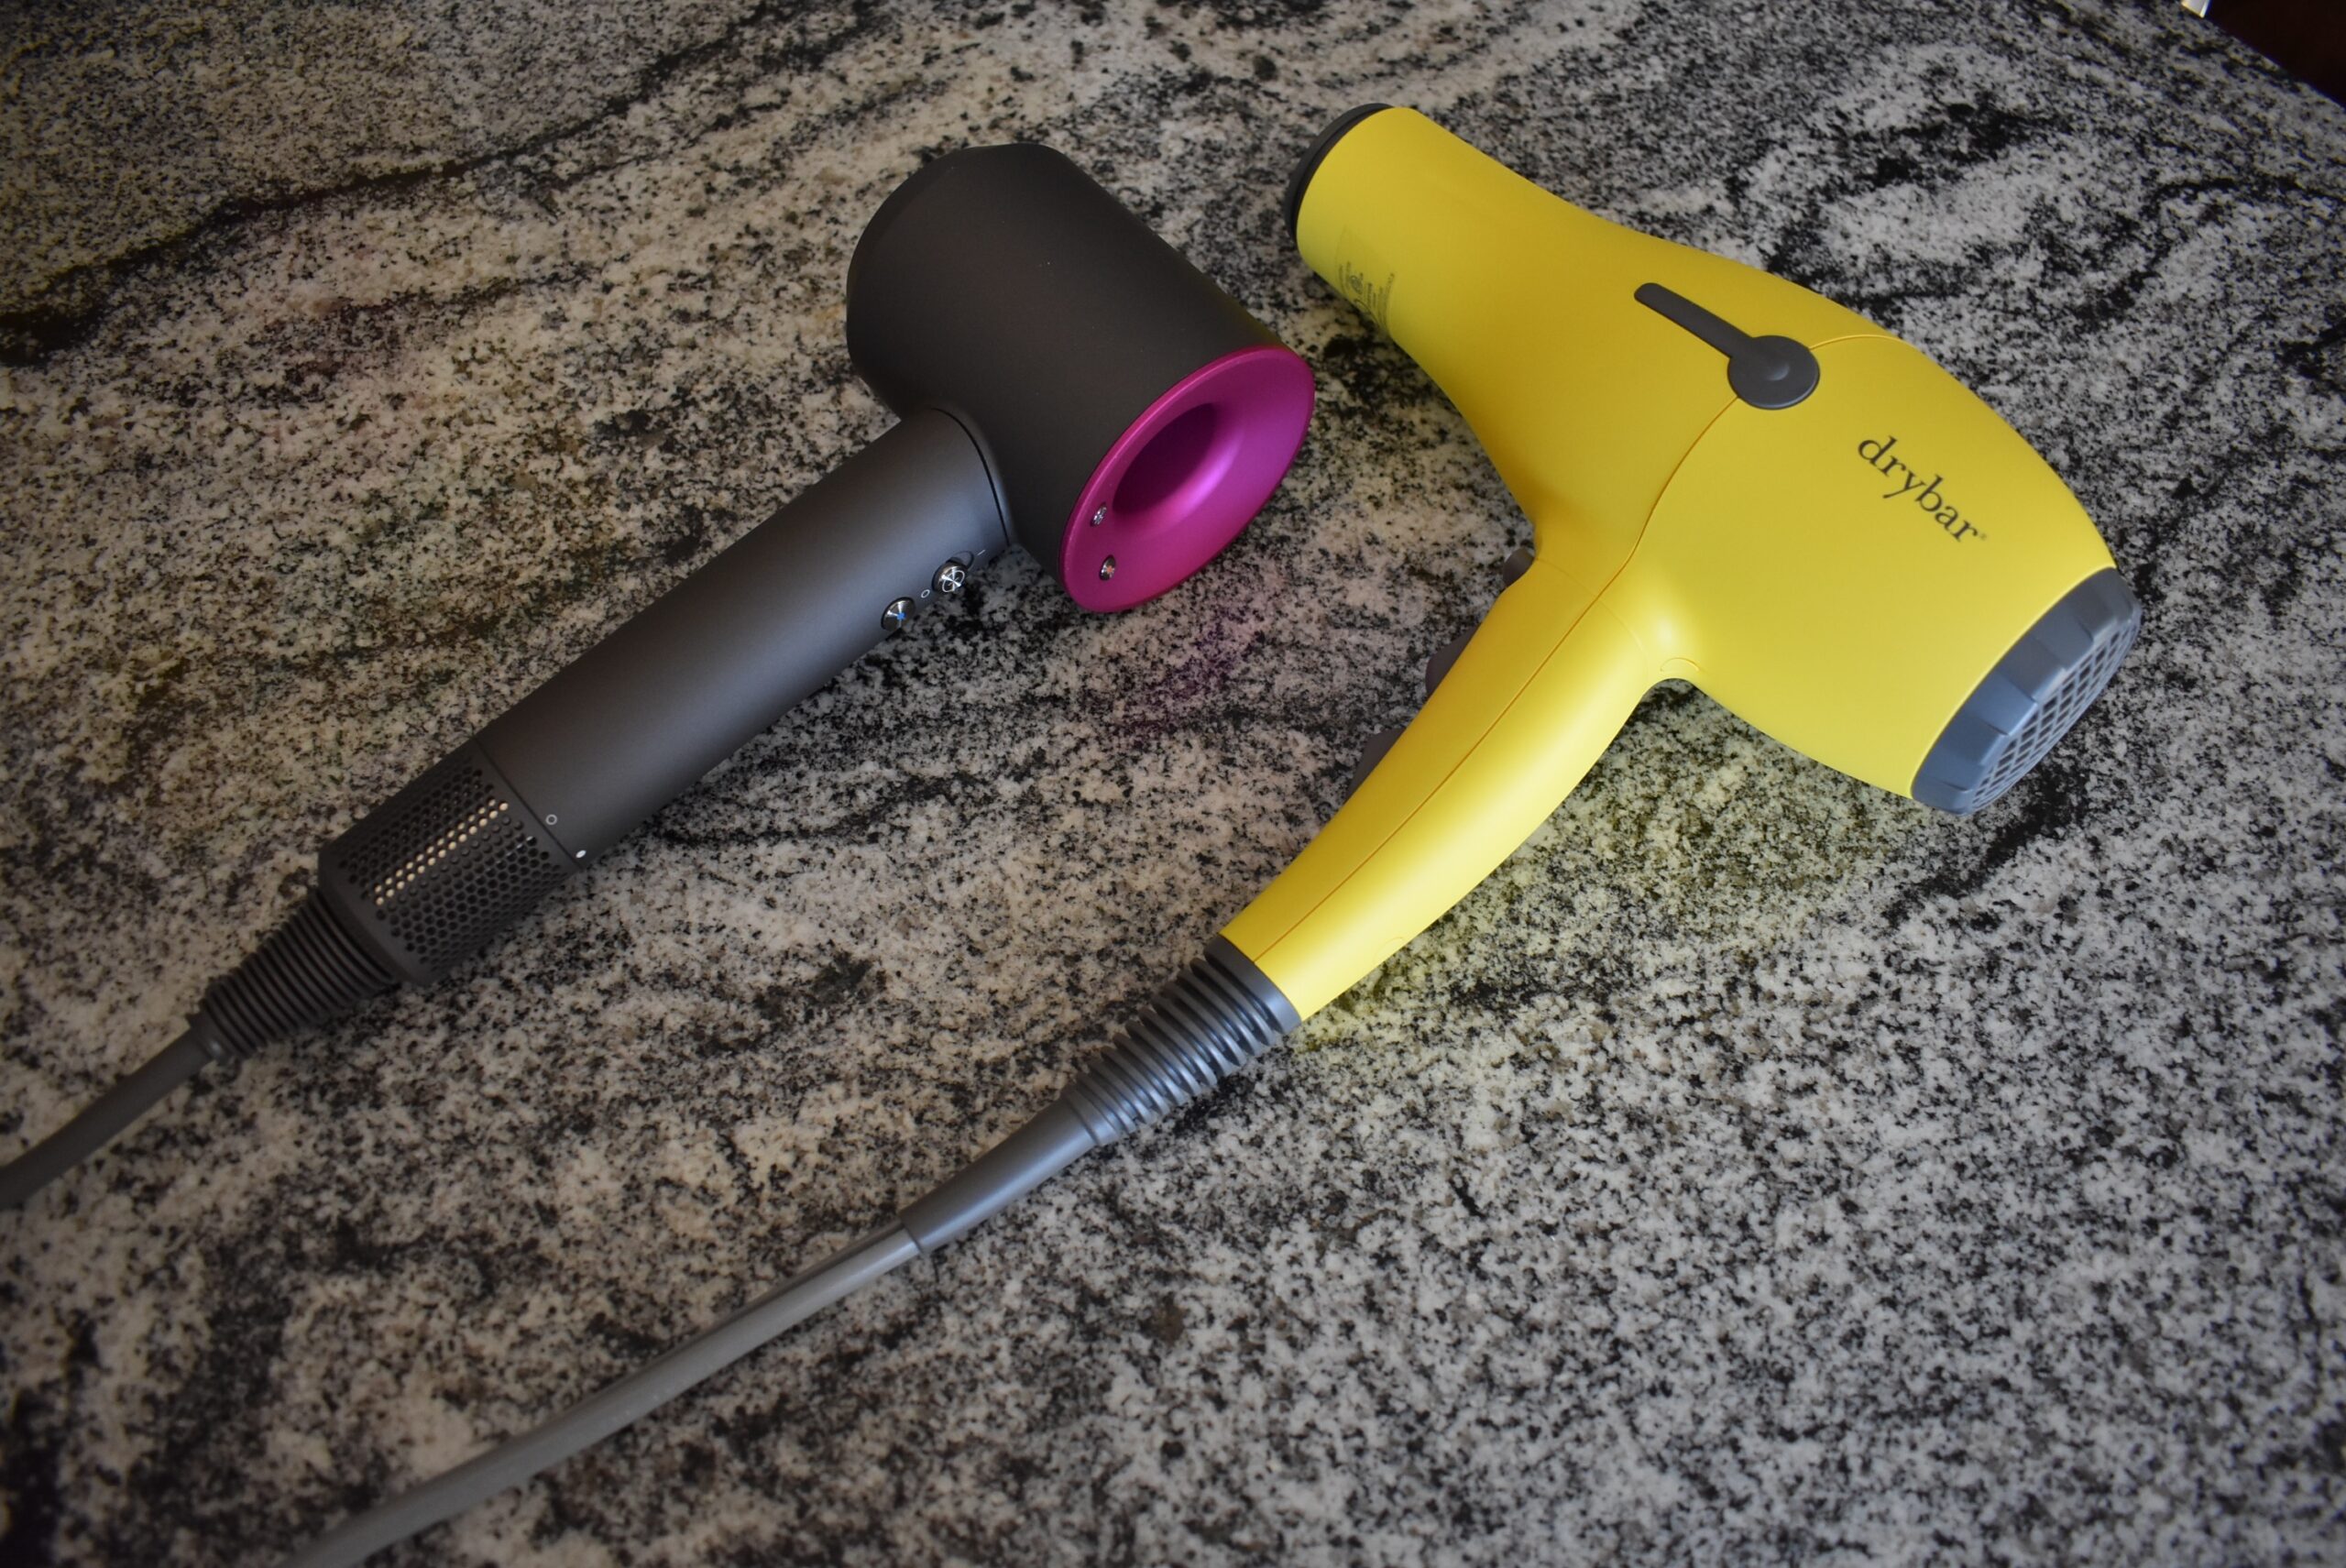 An angled view of the Dyson hair dryer for a product review next to the yellow drybar buttercup